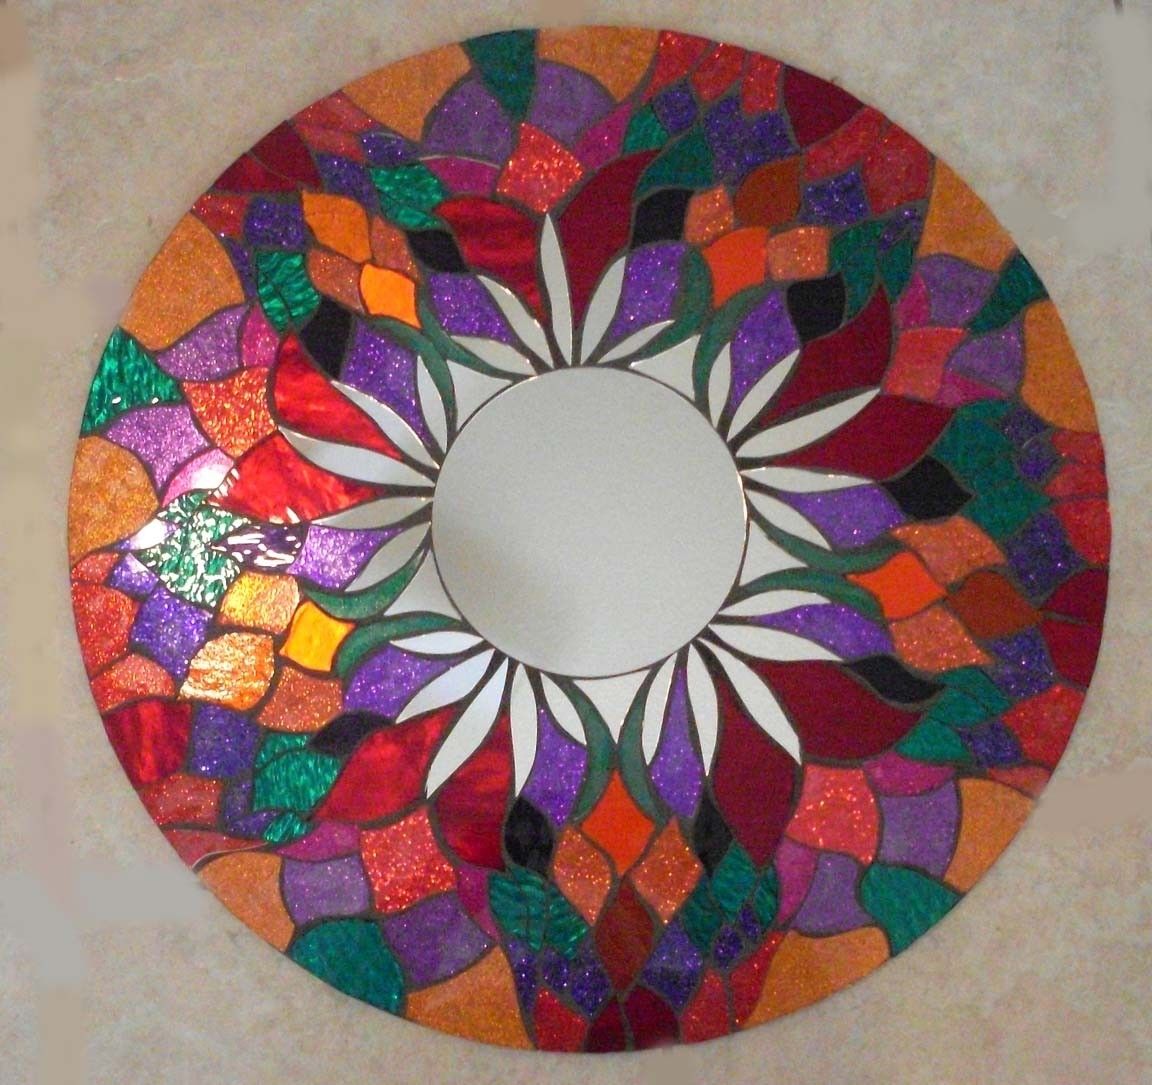 Buy Hand Made Mosaic Mirror Red Round Handmade Glitter Glass Made To Order From Sol Sister